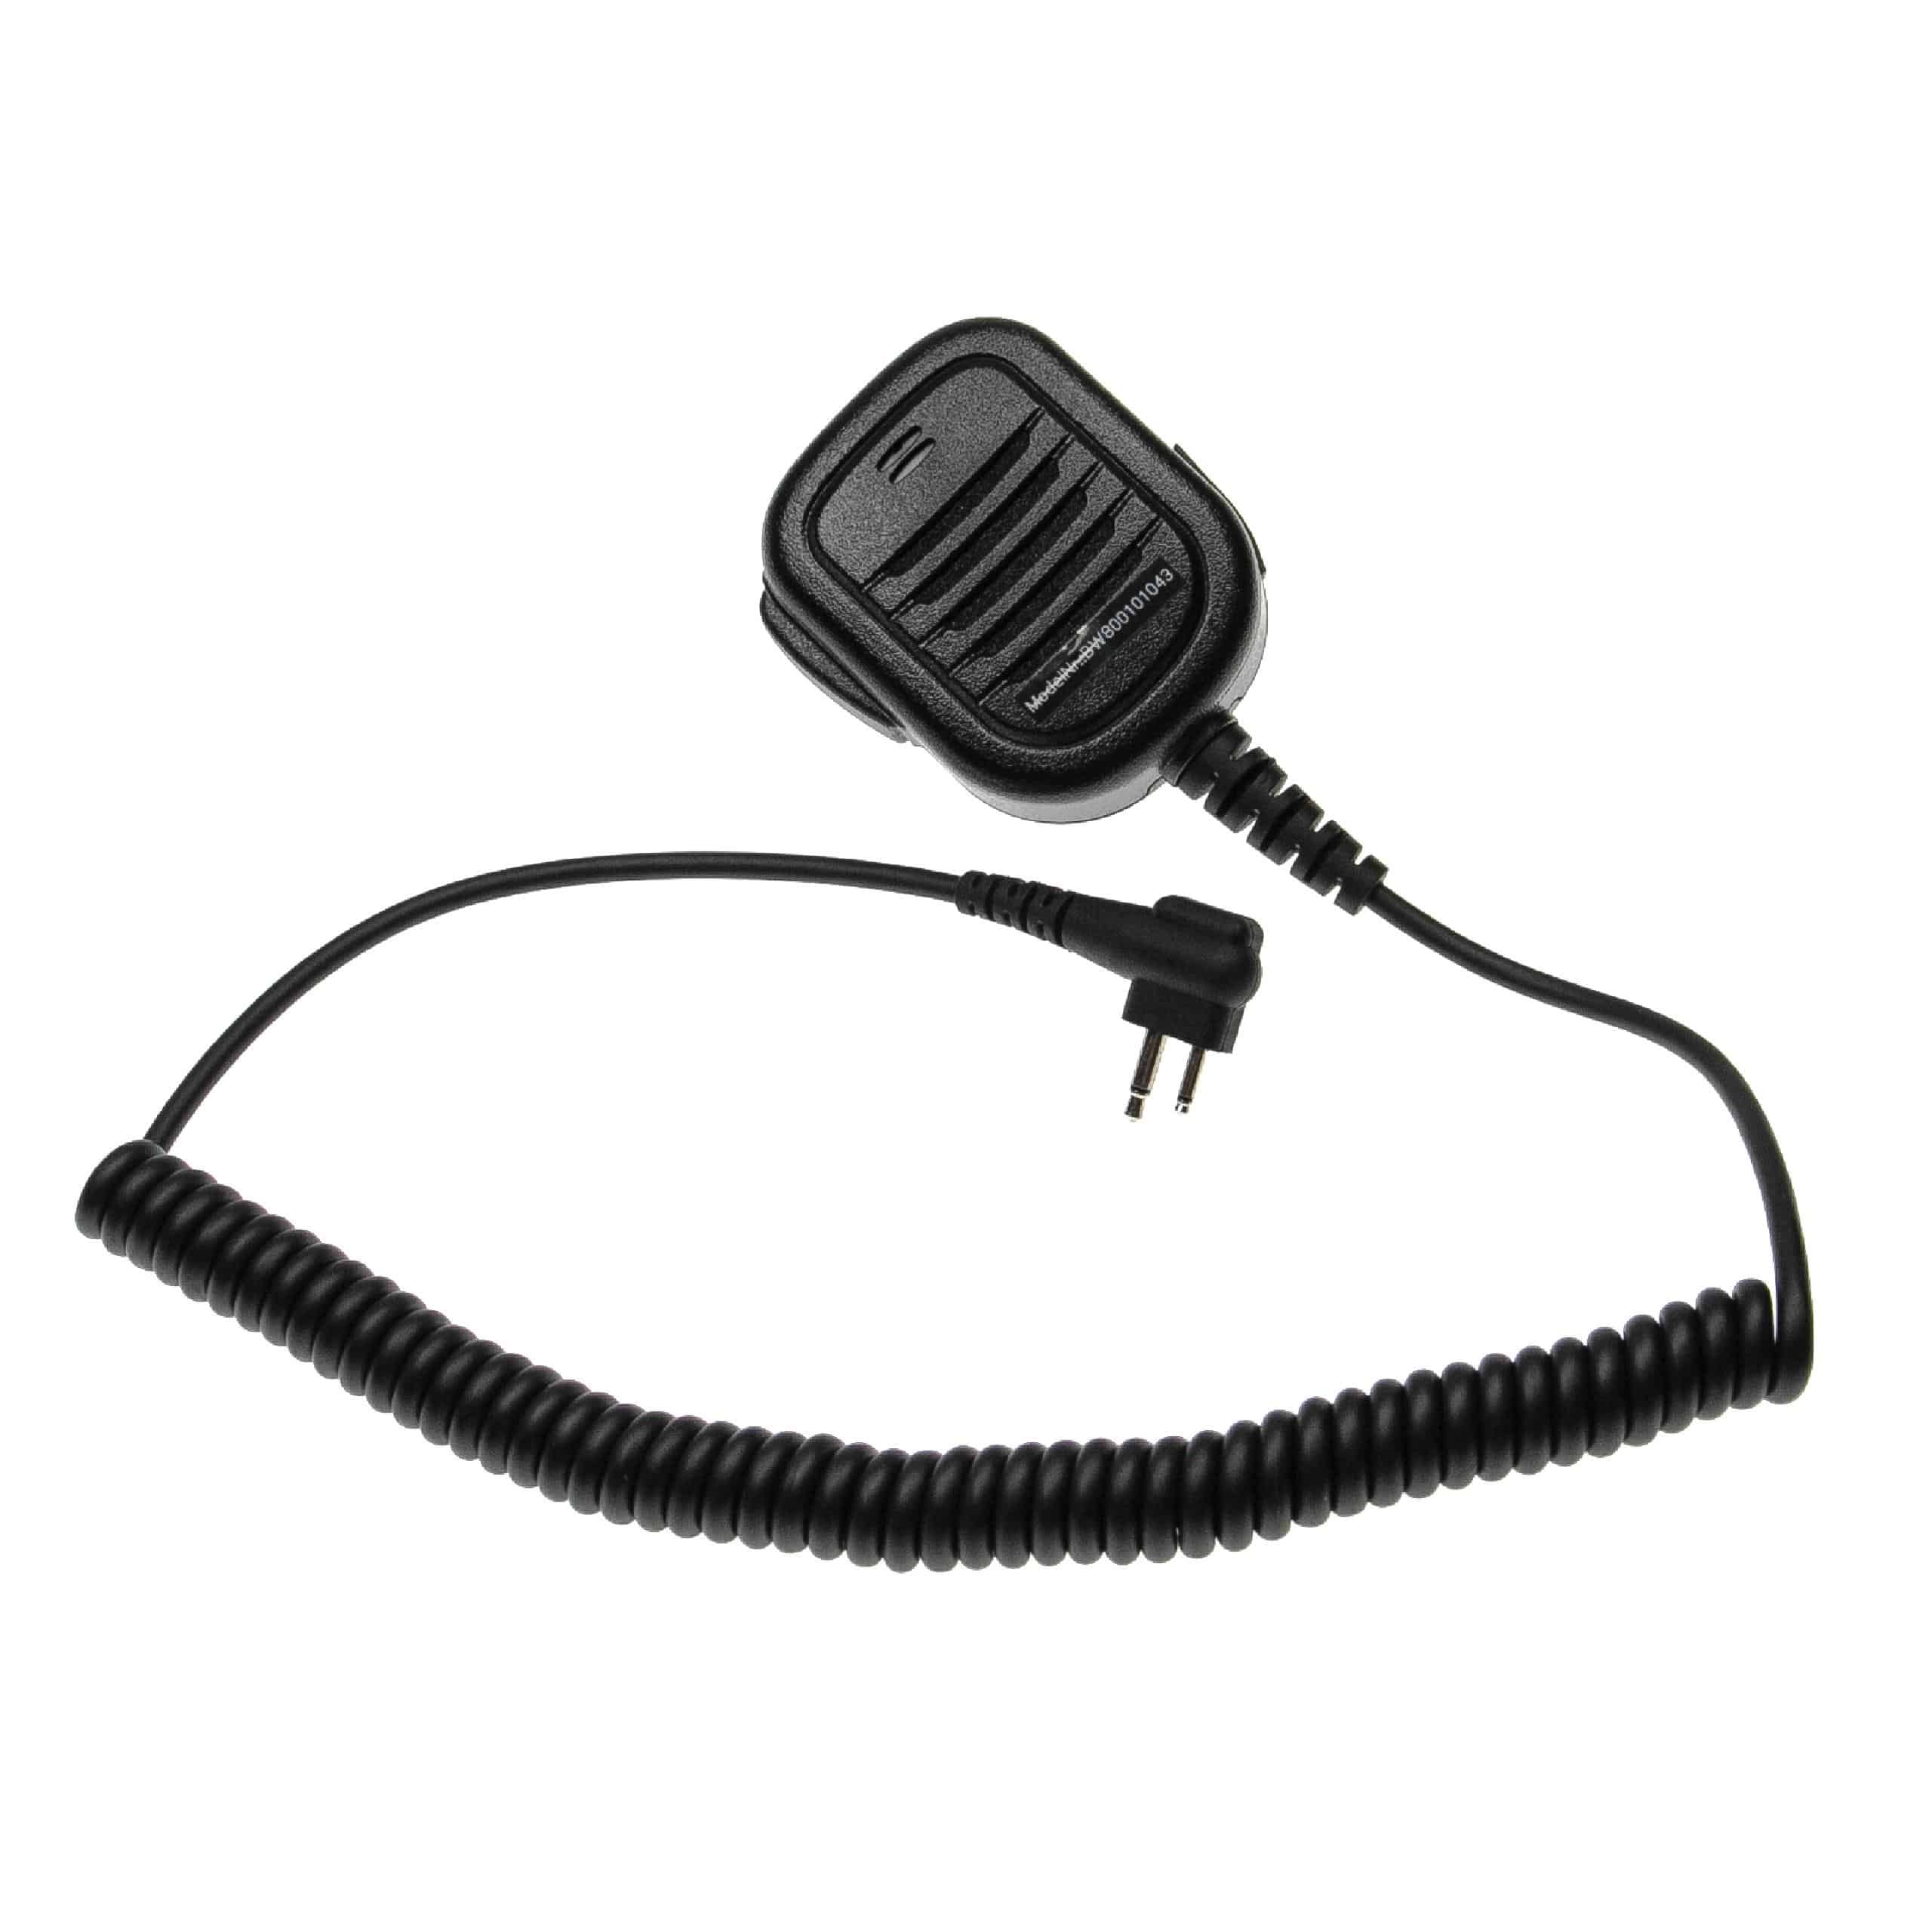 vhbw Speaker Microphone Replacement for Motorola HM150-CP for Walkie Talkie